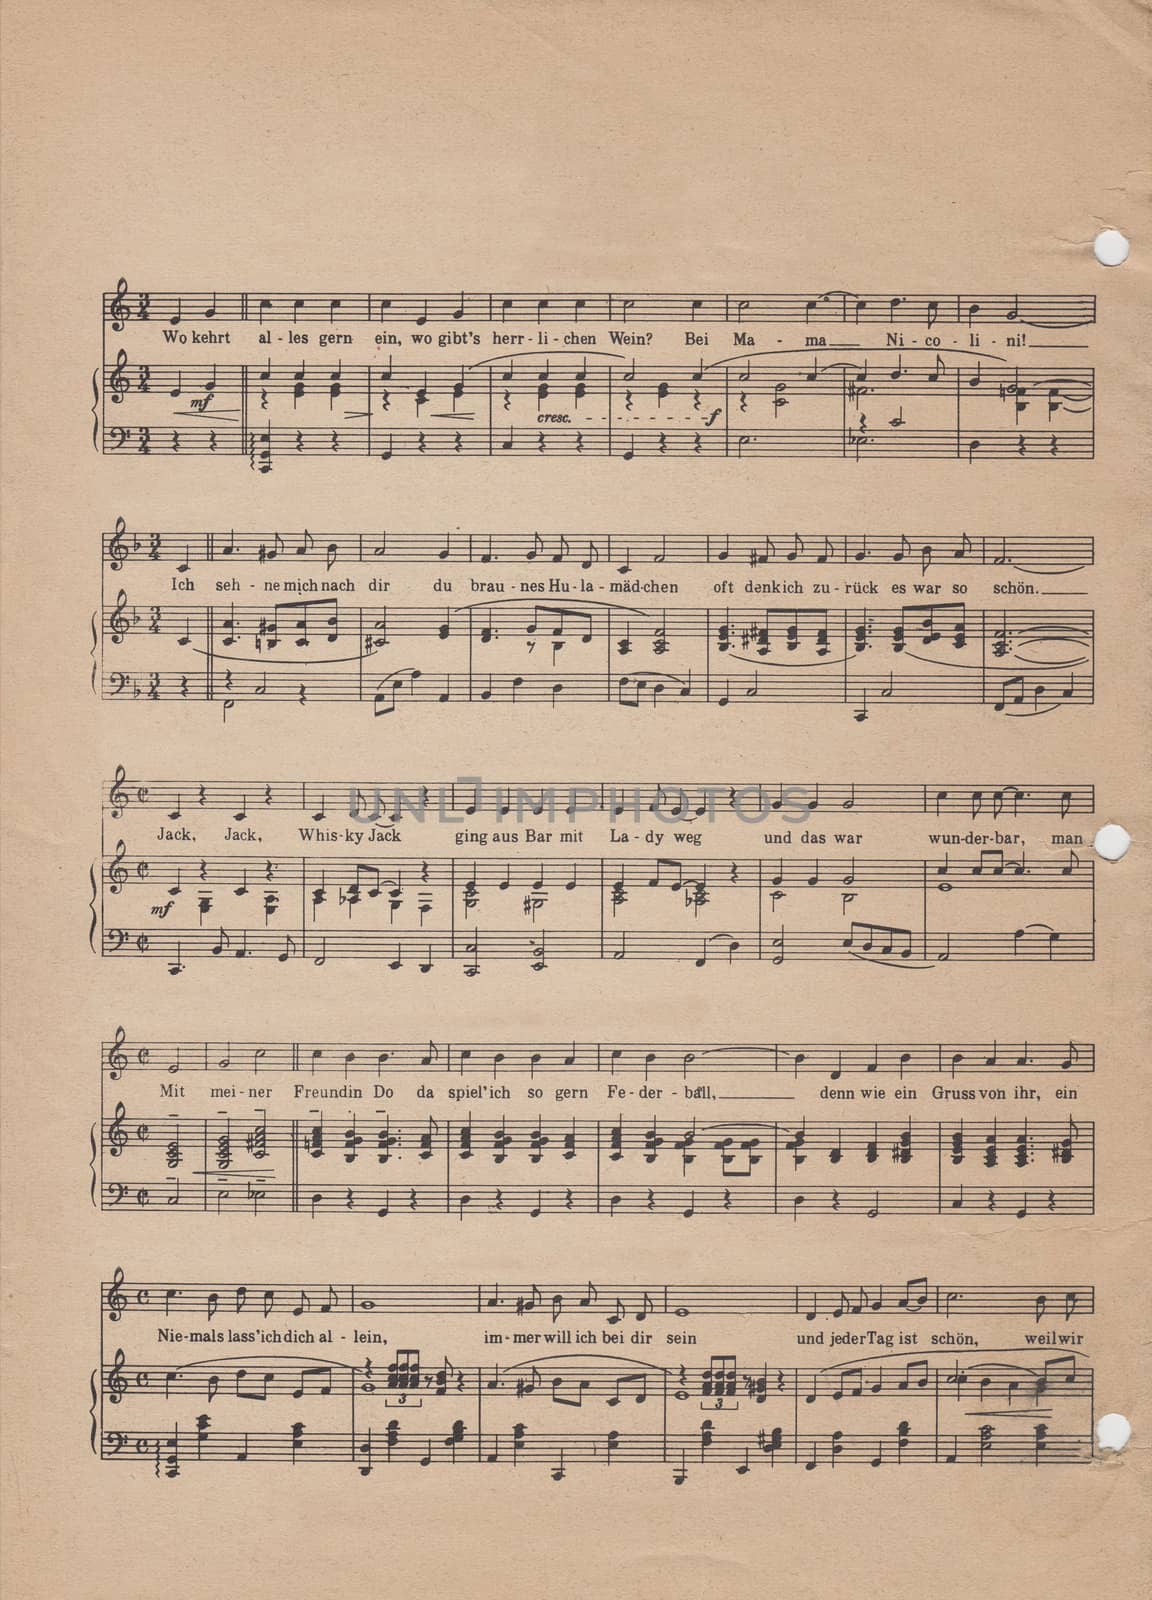 Old music score that was done by my great great grandpa over 100 years ago.